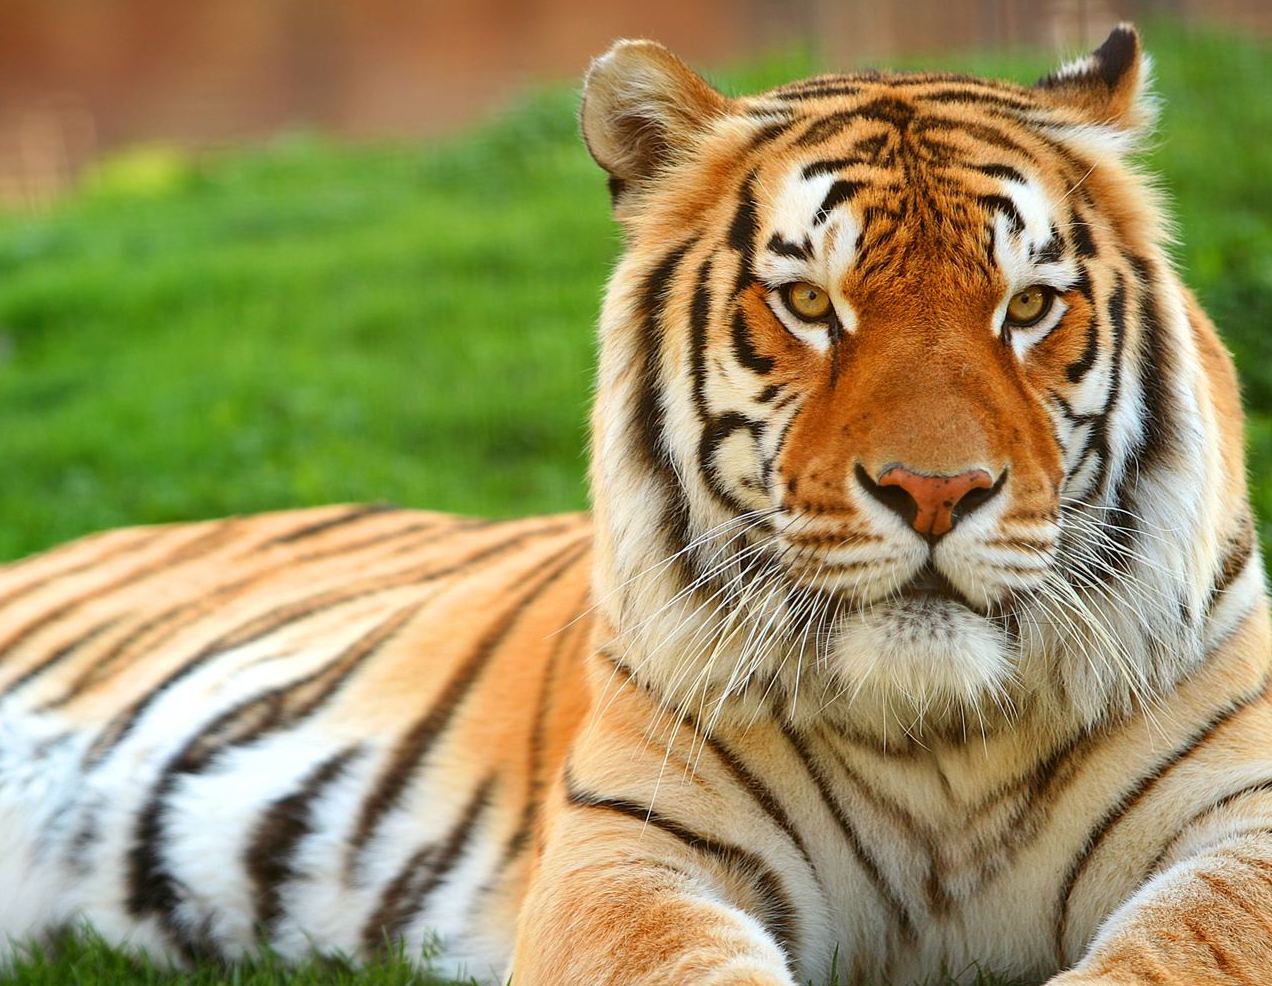 Get the best size of Tiger Wallpaper and Desktop tiger wallpapers here 1272x986